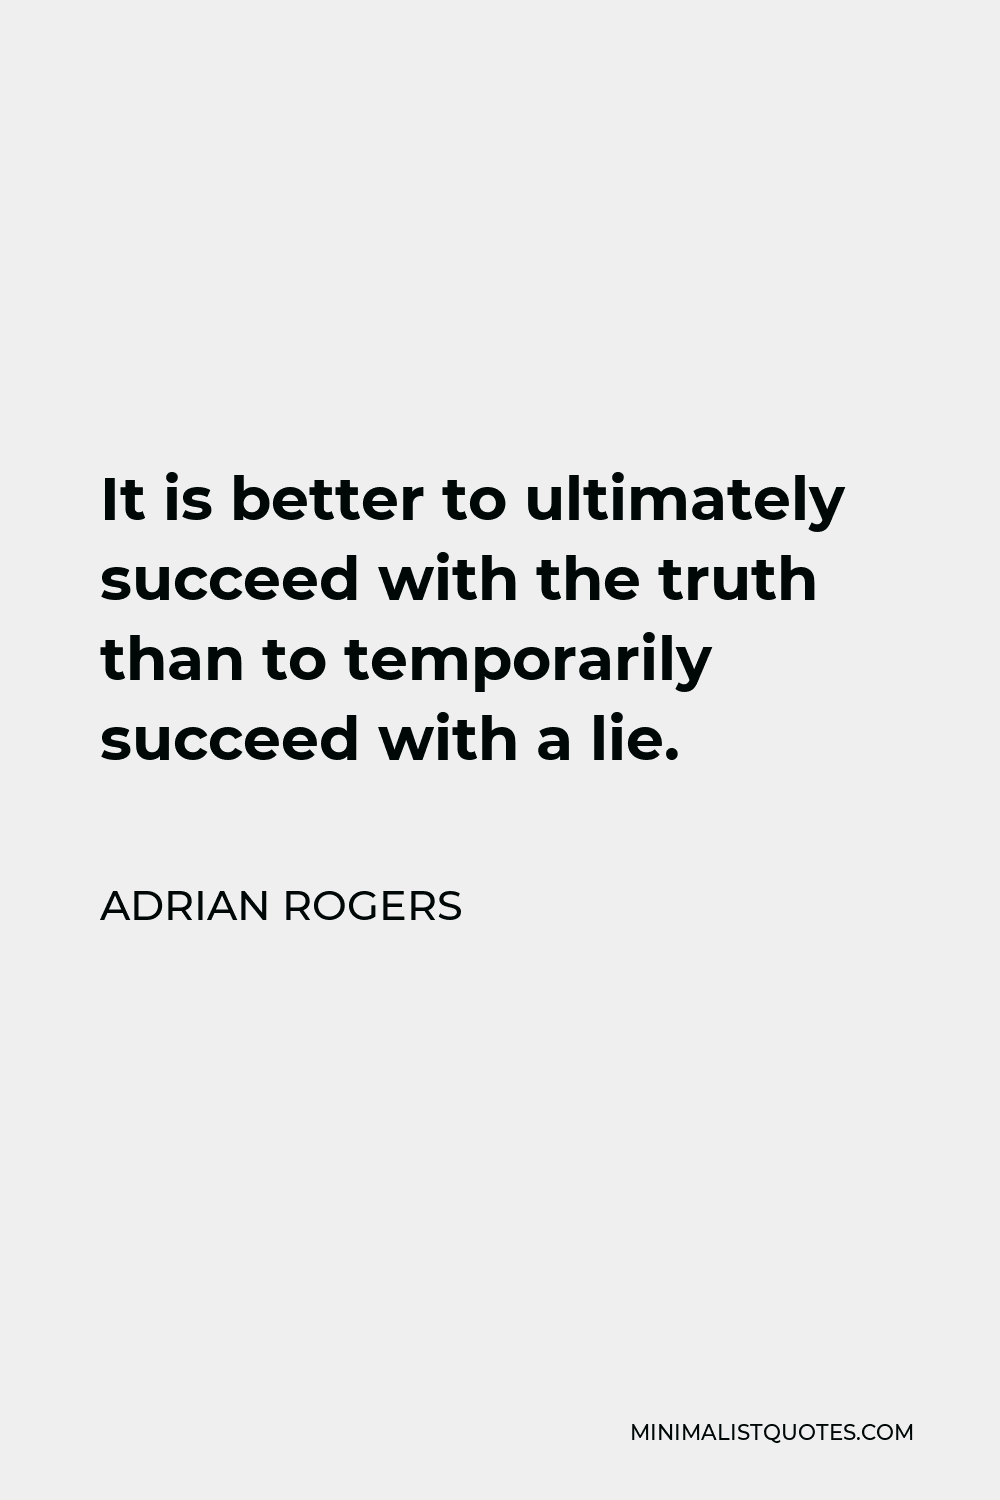 Adrian Rogers Quote - It is better to ultimately succeed with the truth than to temporarily succeed with a lie. There is only one Gospel.